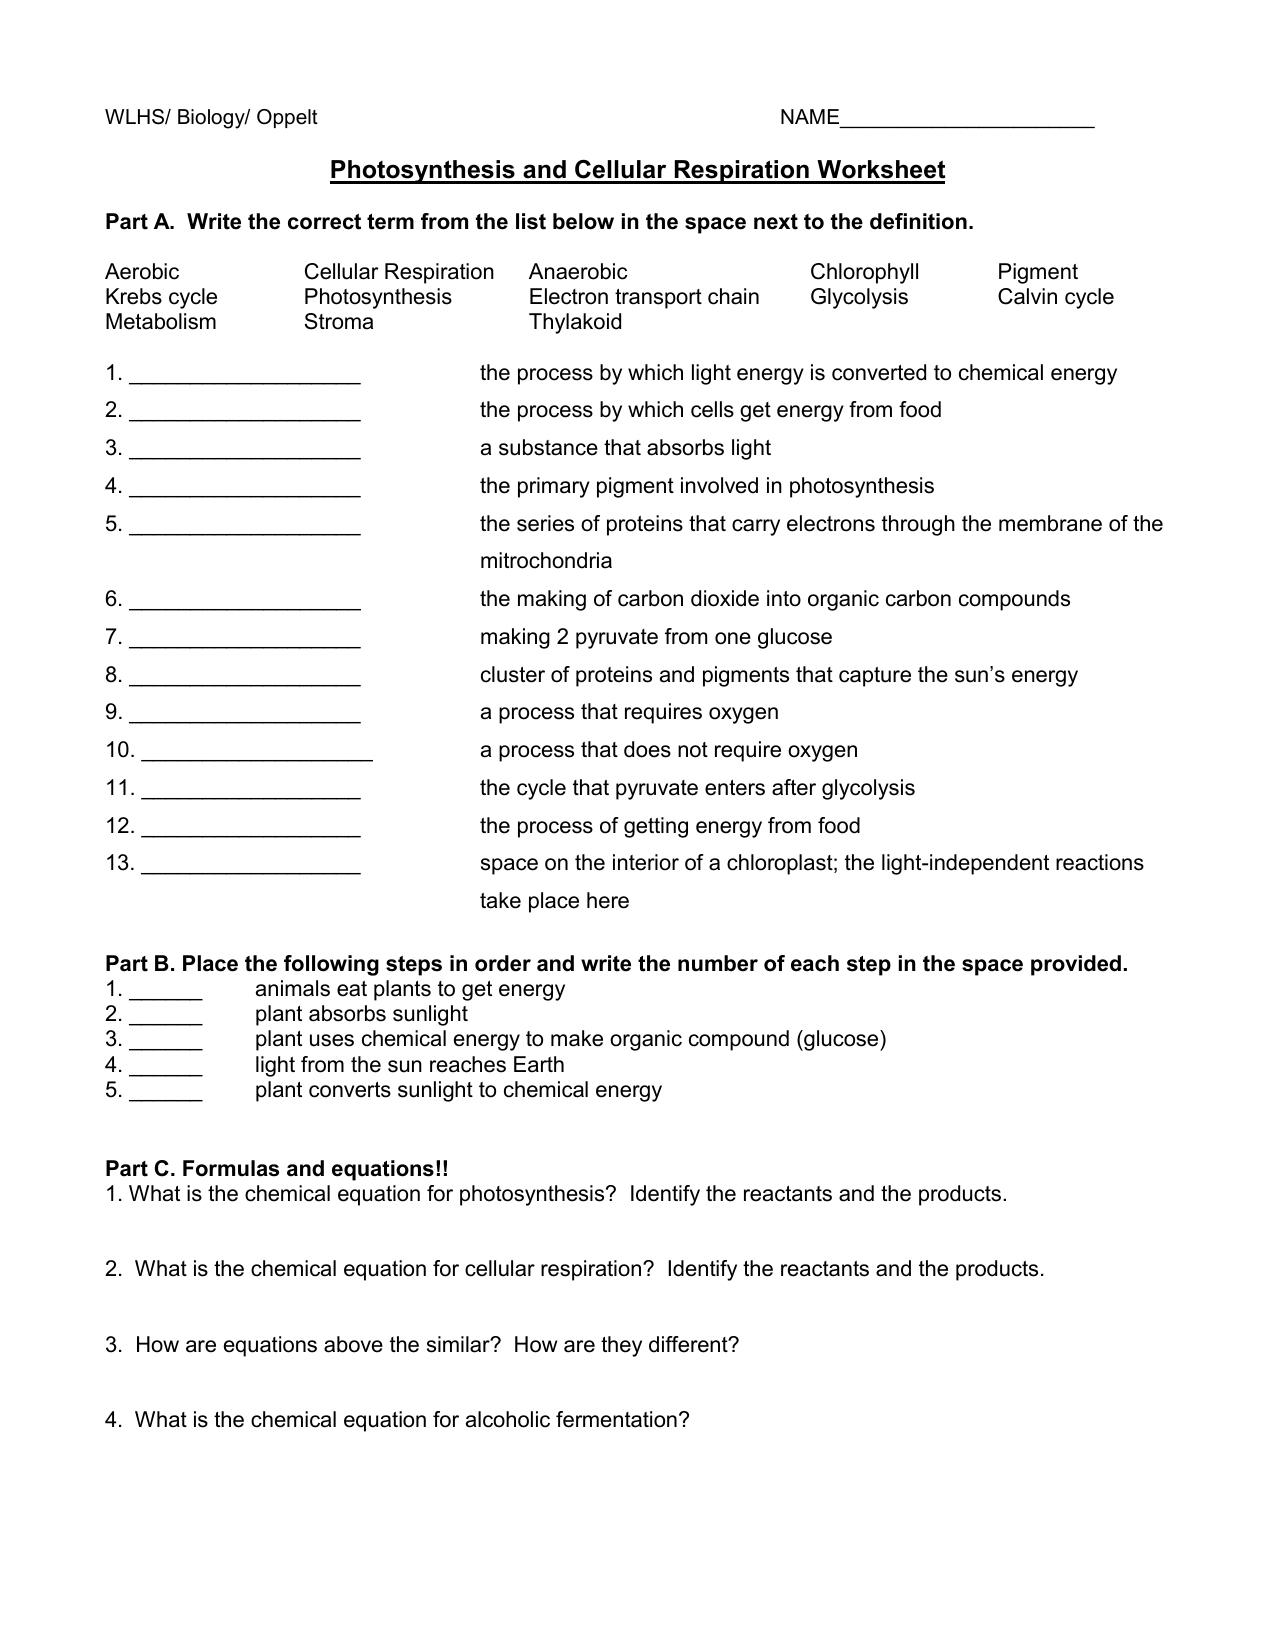 skills-worksheet-photosynthesis-and-cellular-respiration-answers-skillsworksheets